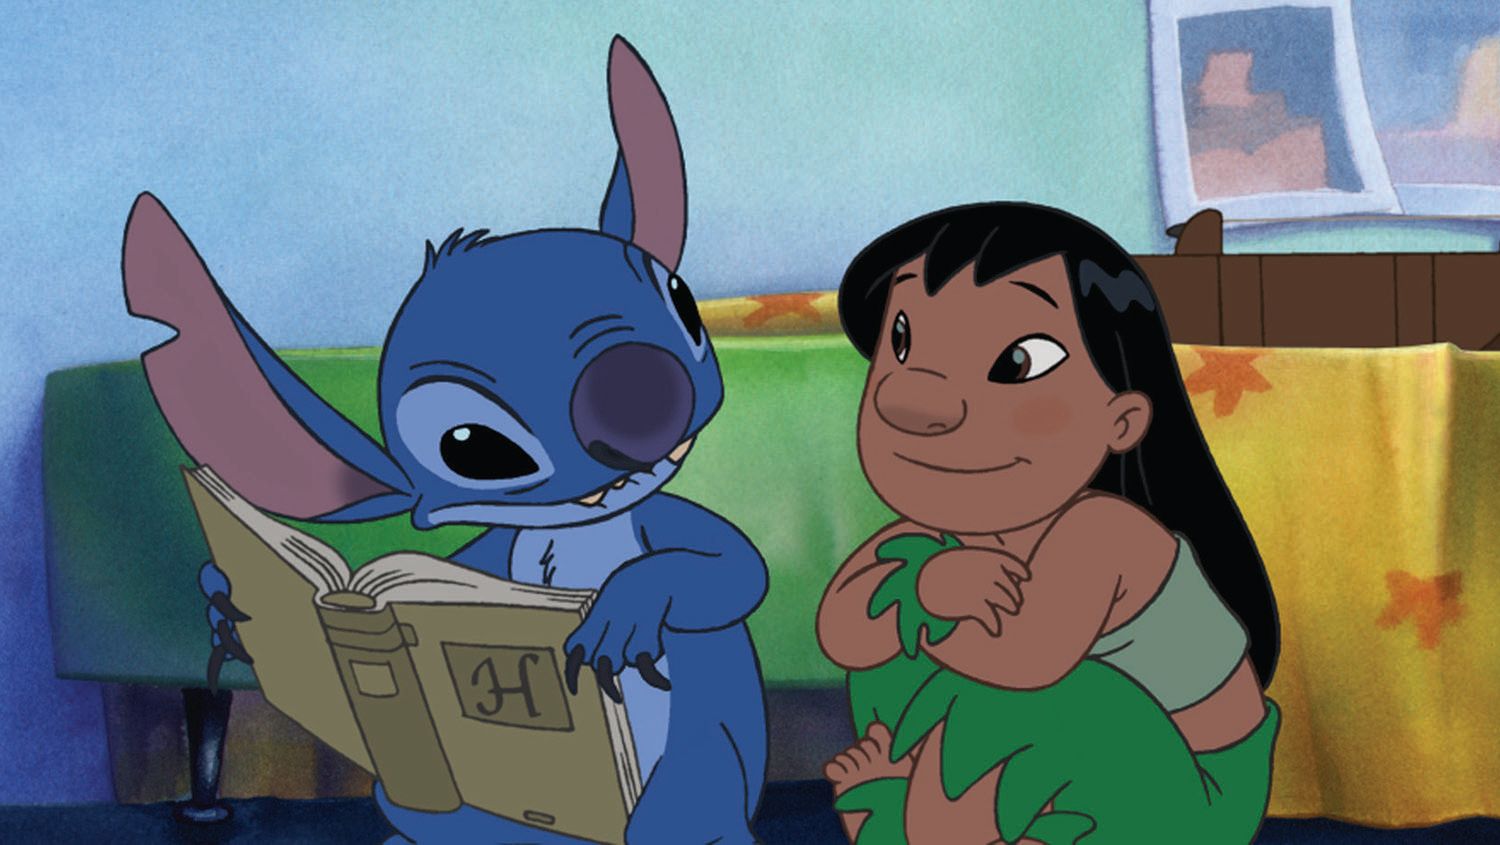 Disney's Live-Action Lilo and Stitch Hires Director